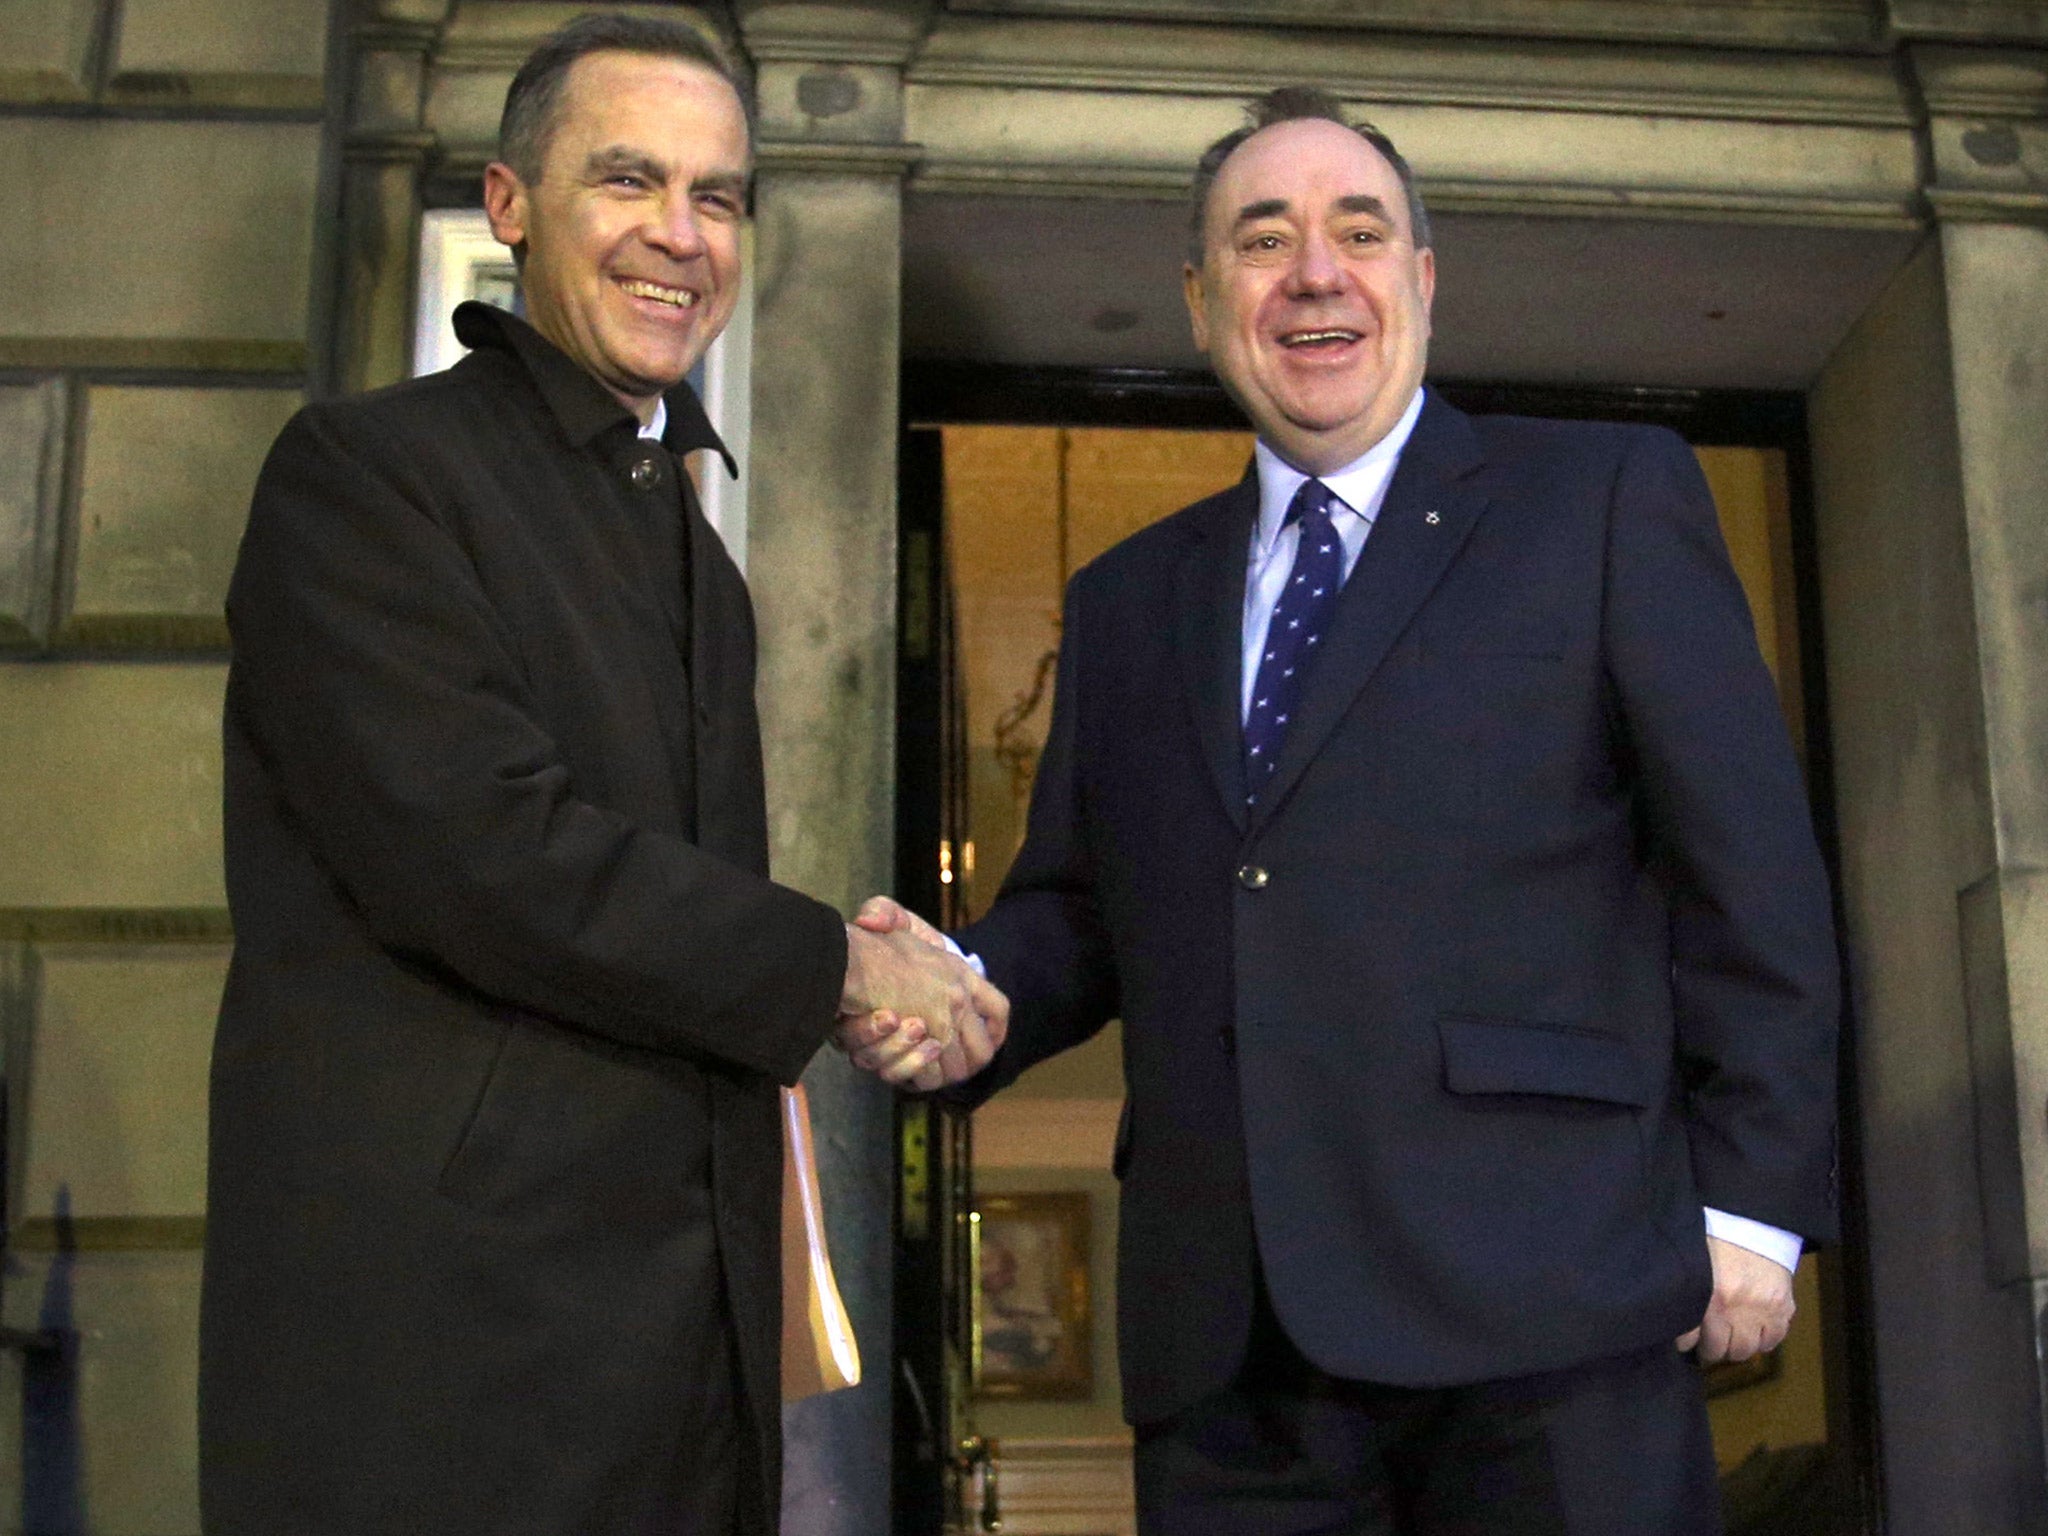 Bank of England governor Mark Carney (left) meets Scottish First Minister Alex Salmond